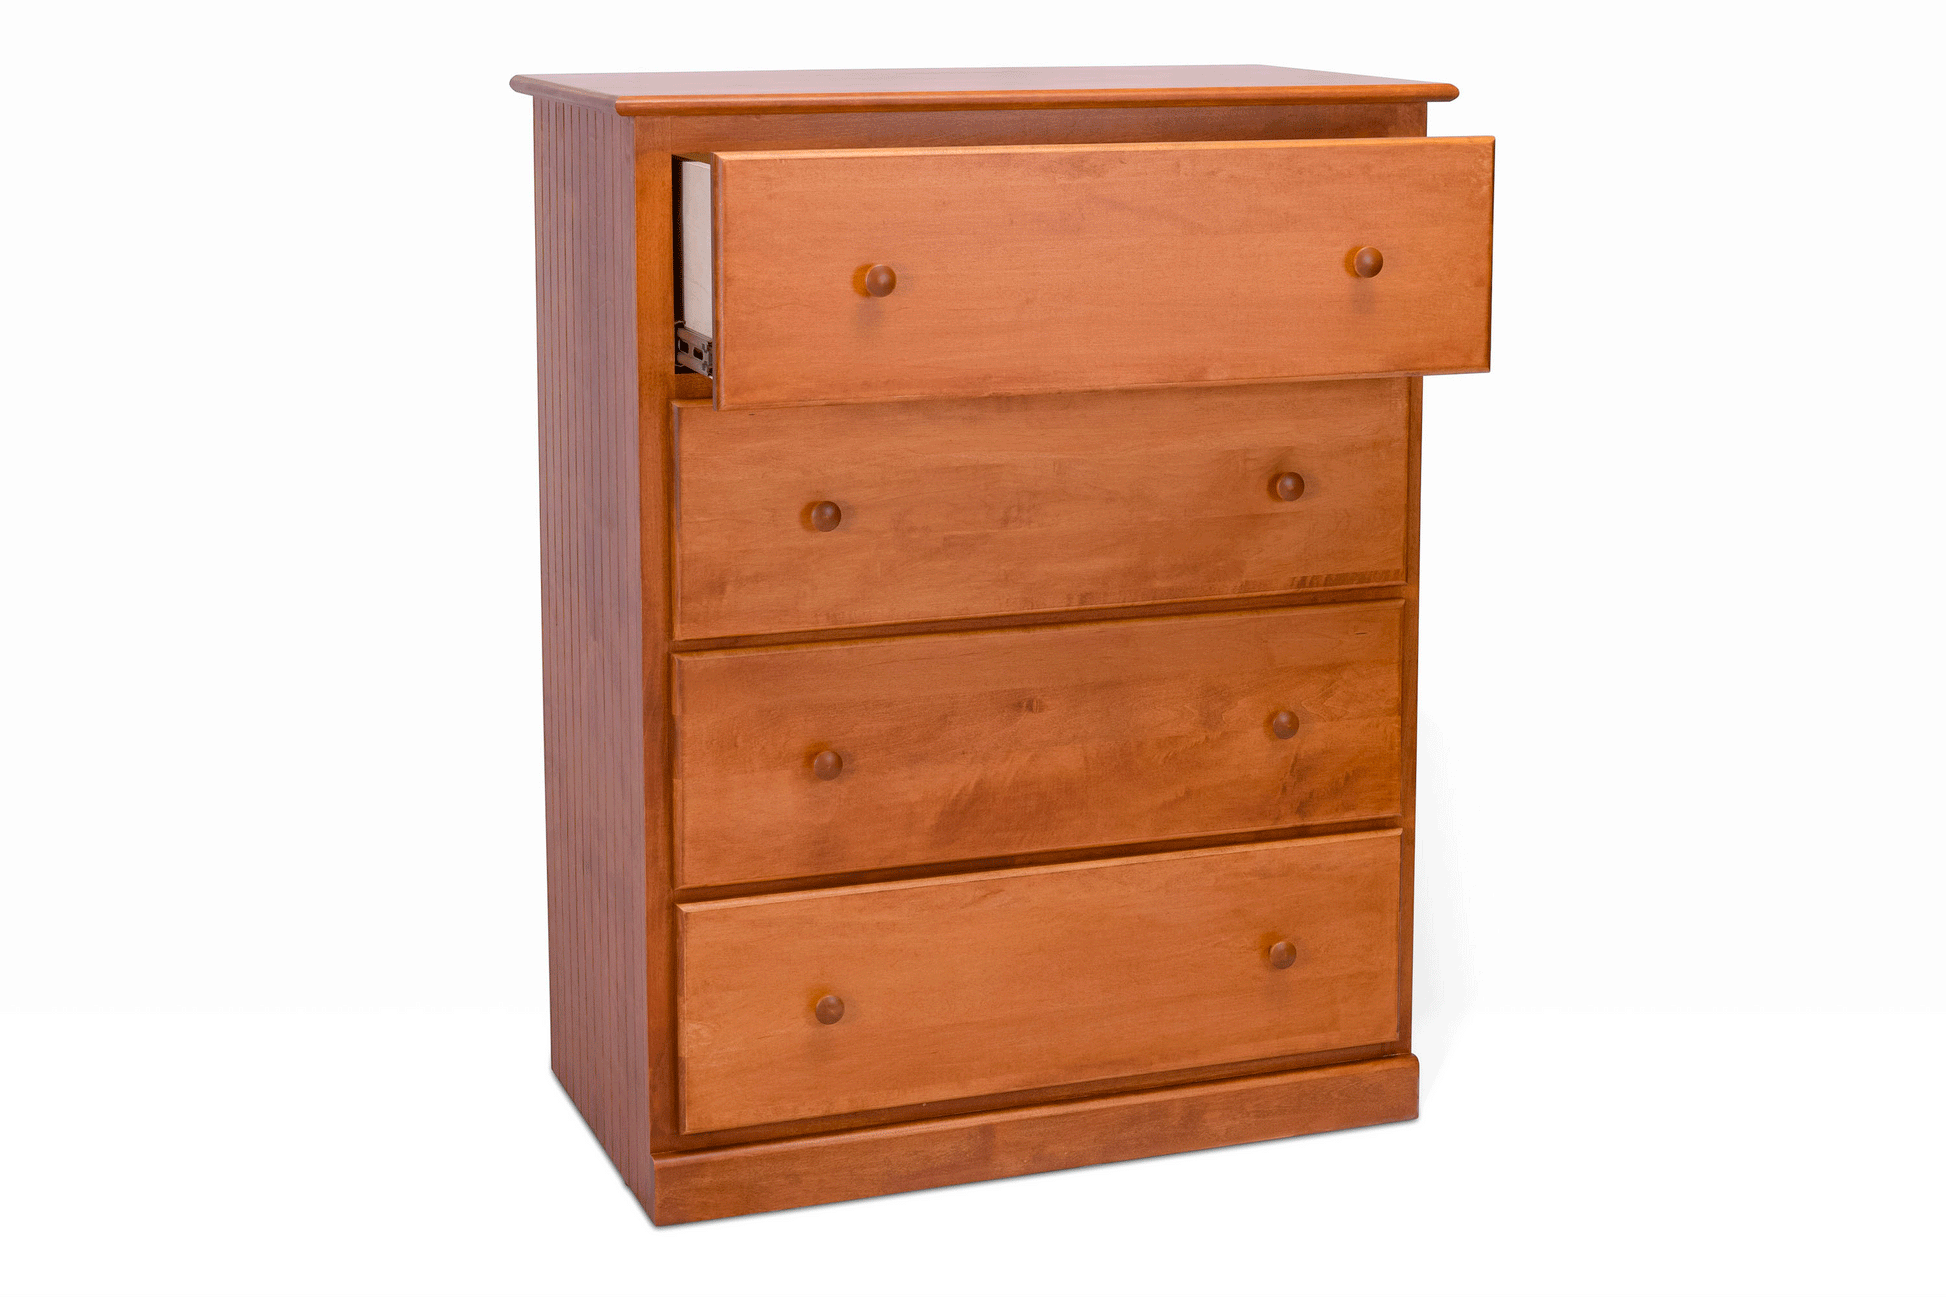 Acadia Cottage Chest: 4 drawers, rustic charm, nutmeg finish. Pictured with drawers open and bead board sides.